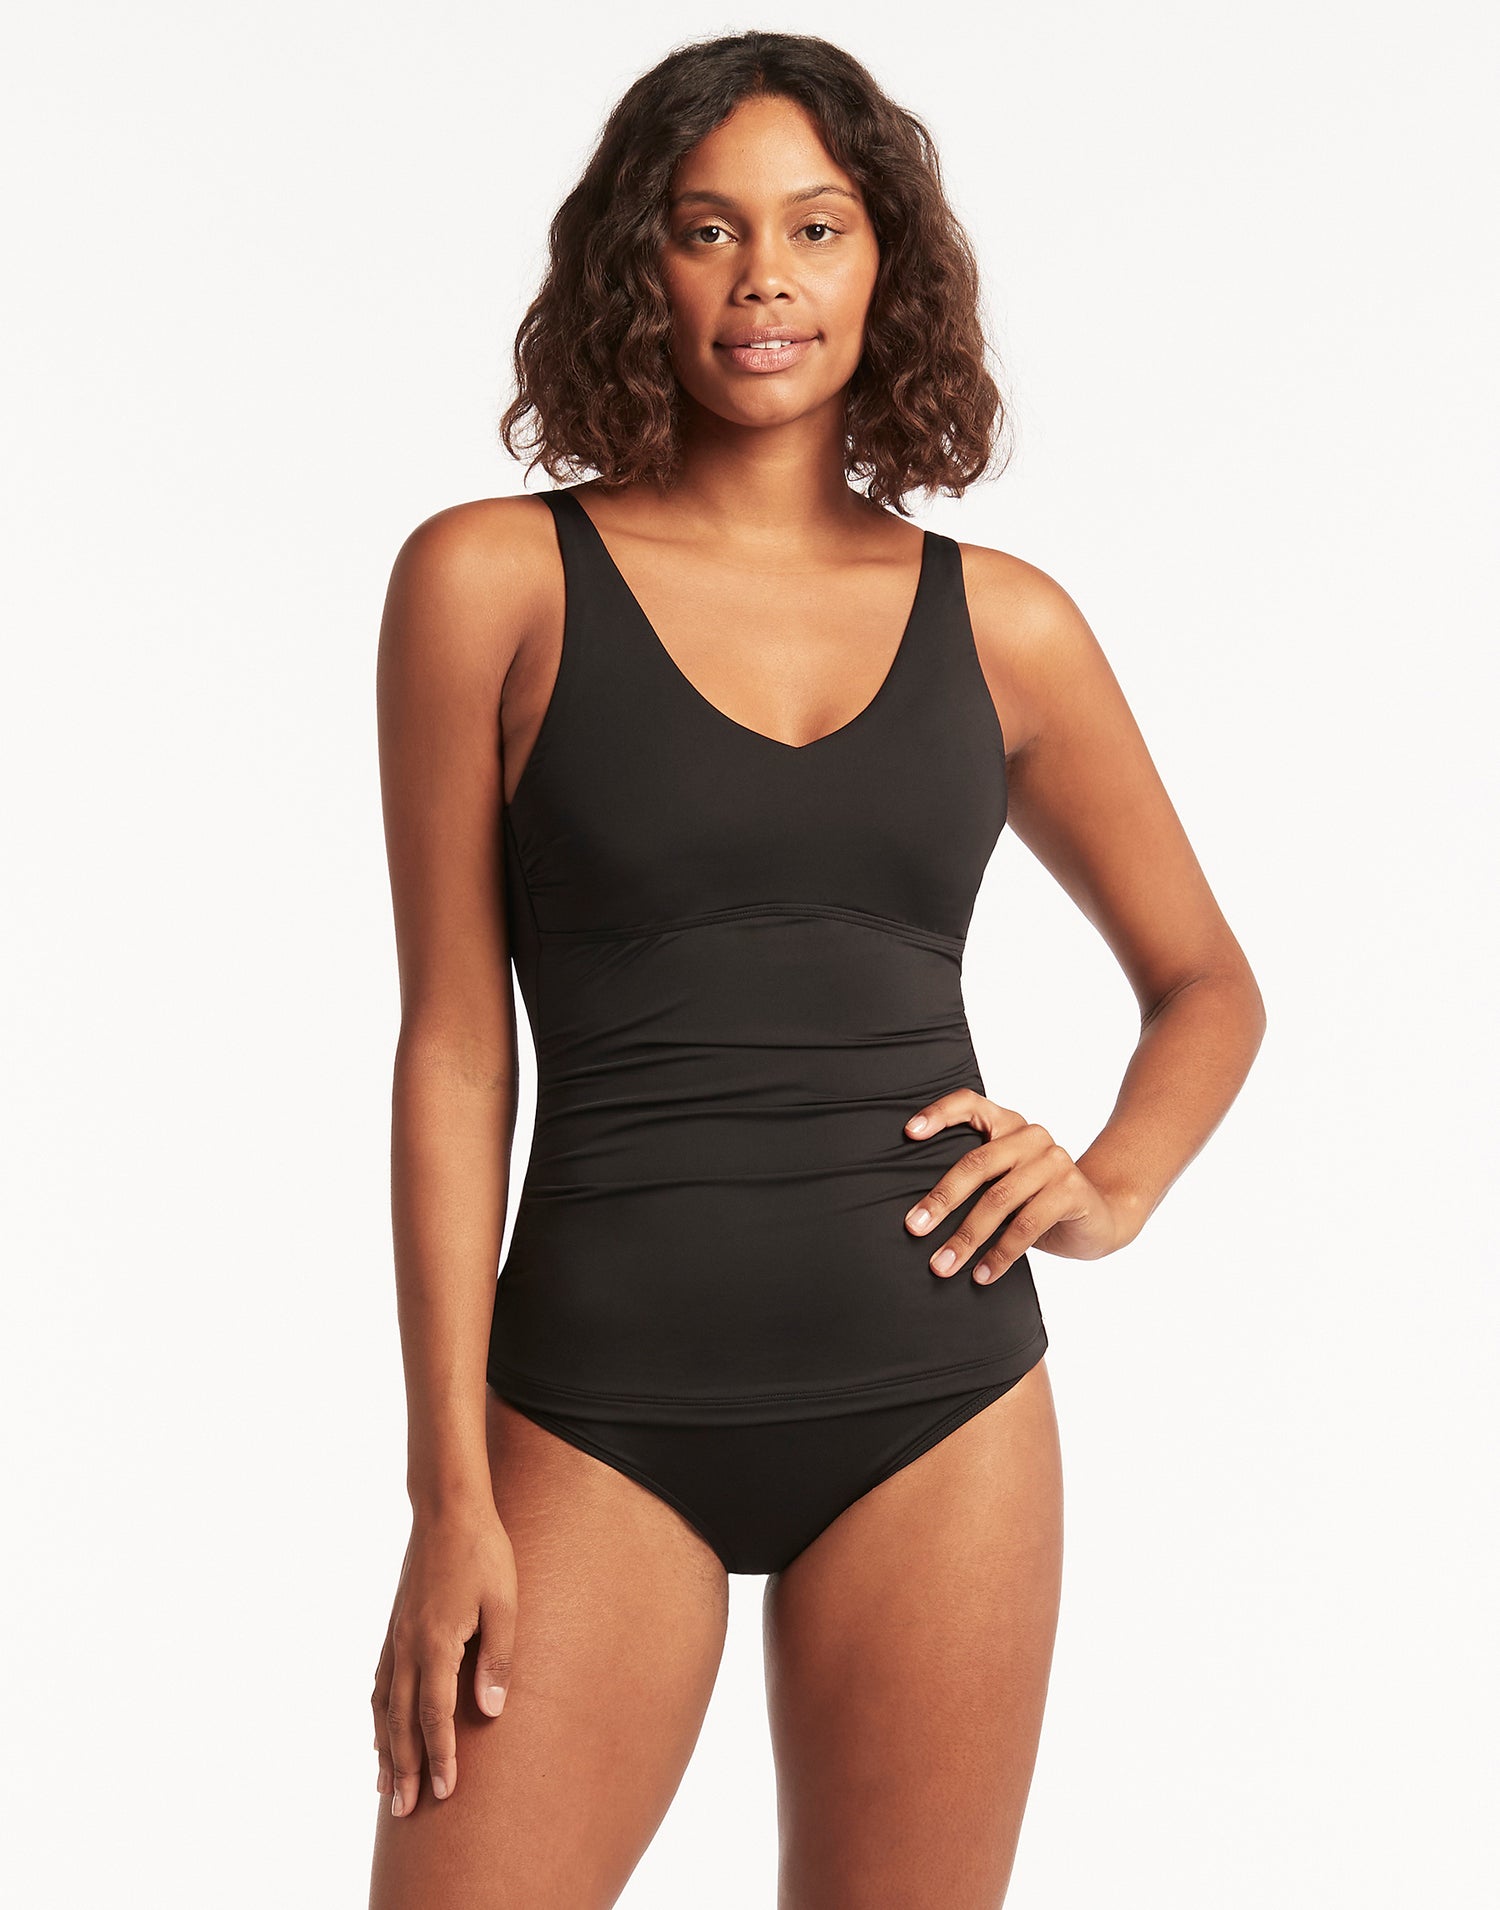 Essentials Singlet D & DD Cup Tankini Top by Sea Level in Black - Front View